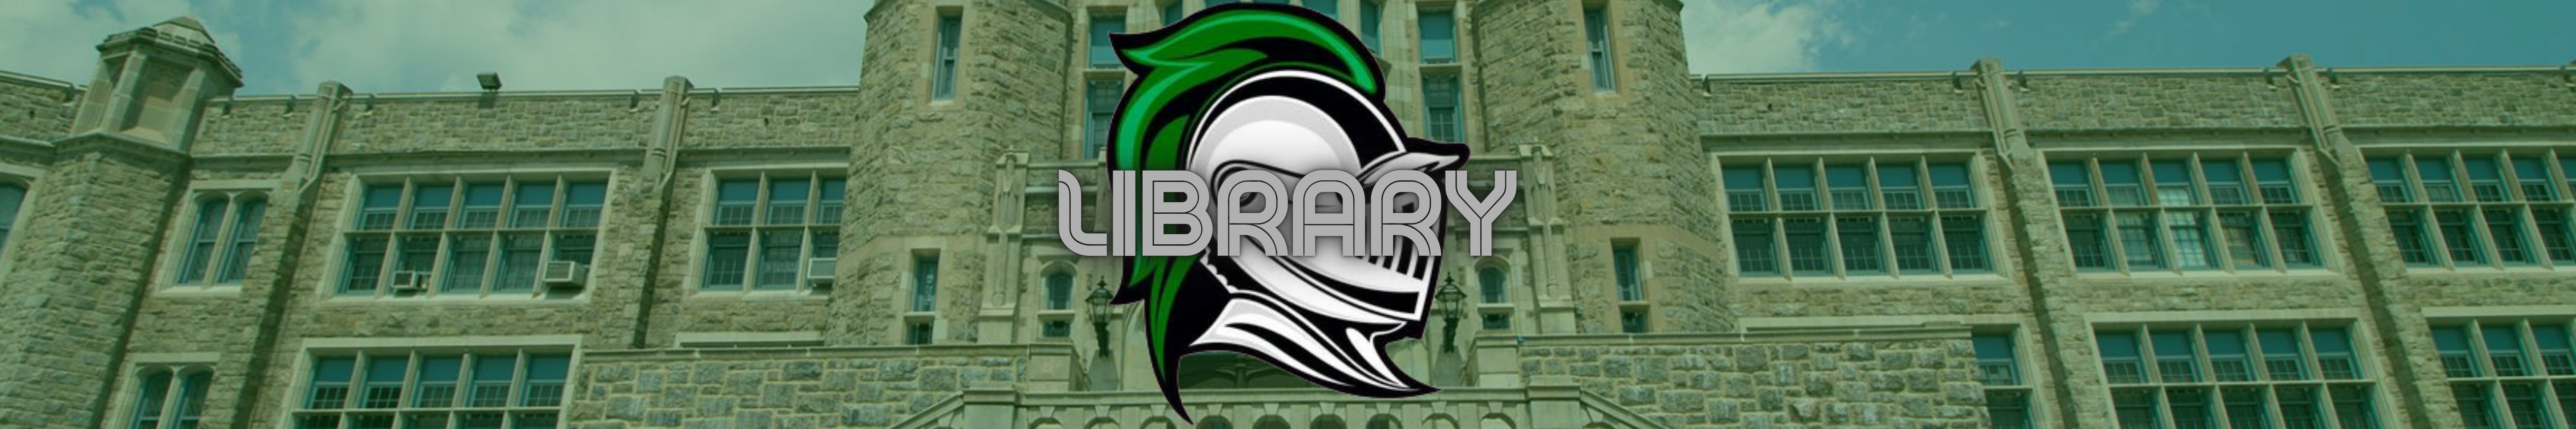 LIBRARY banner